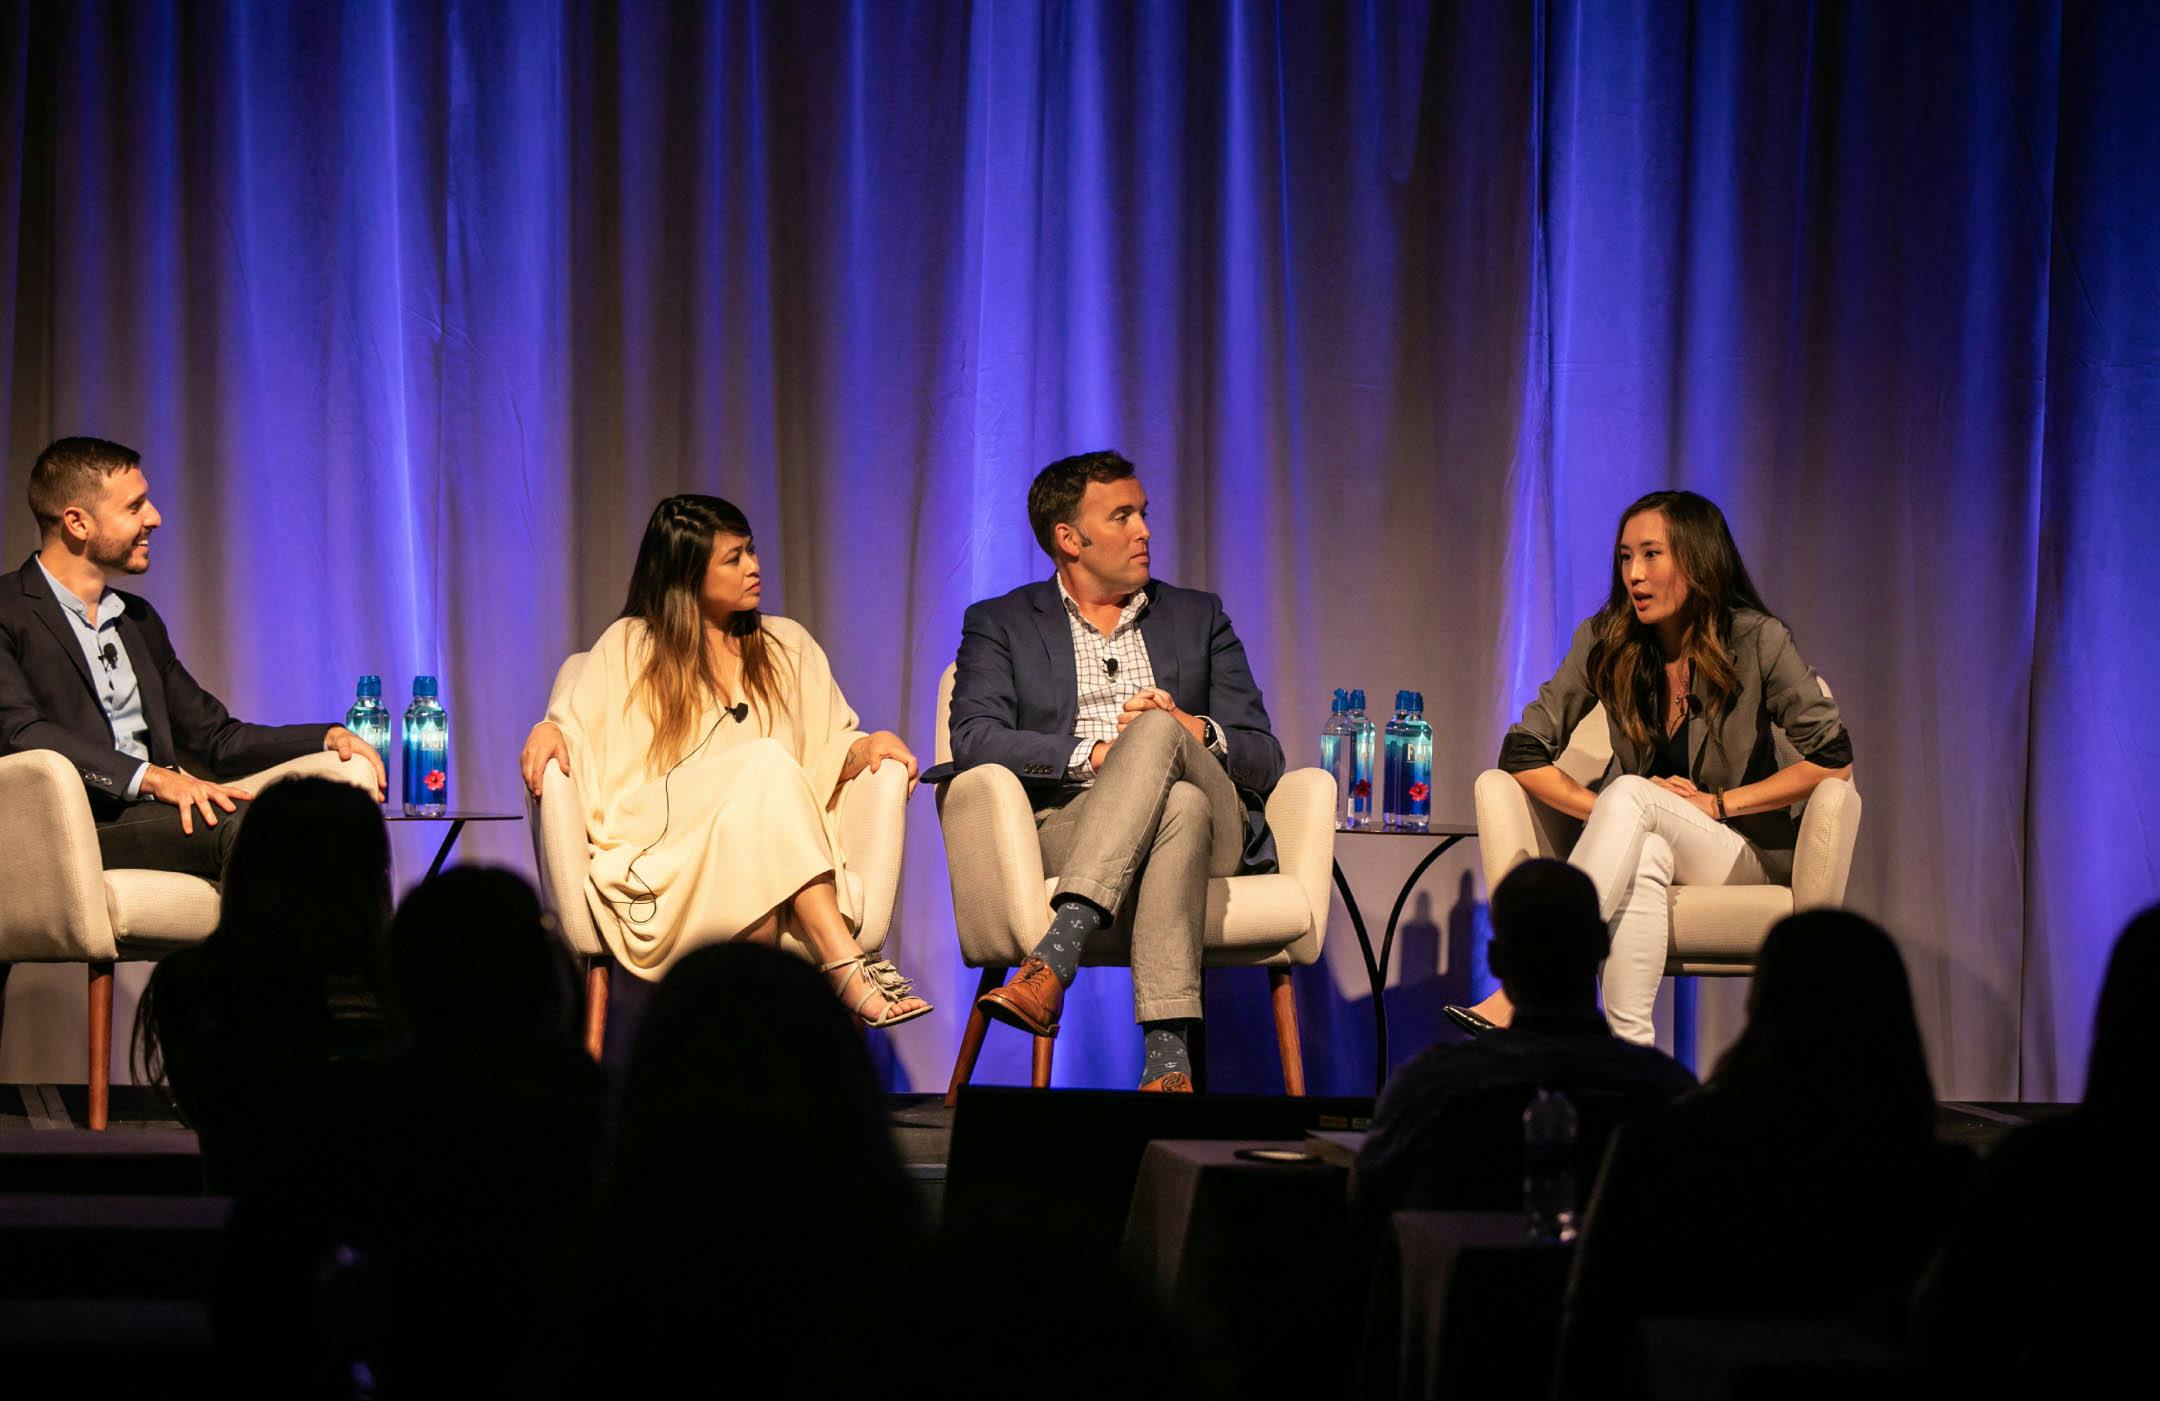 Photograph of four panelists on stage for "Moments that Matter" panel